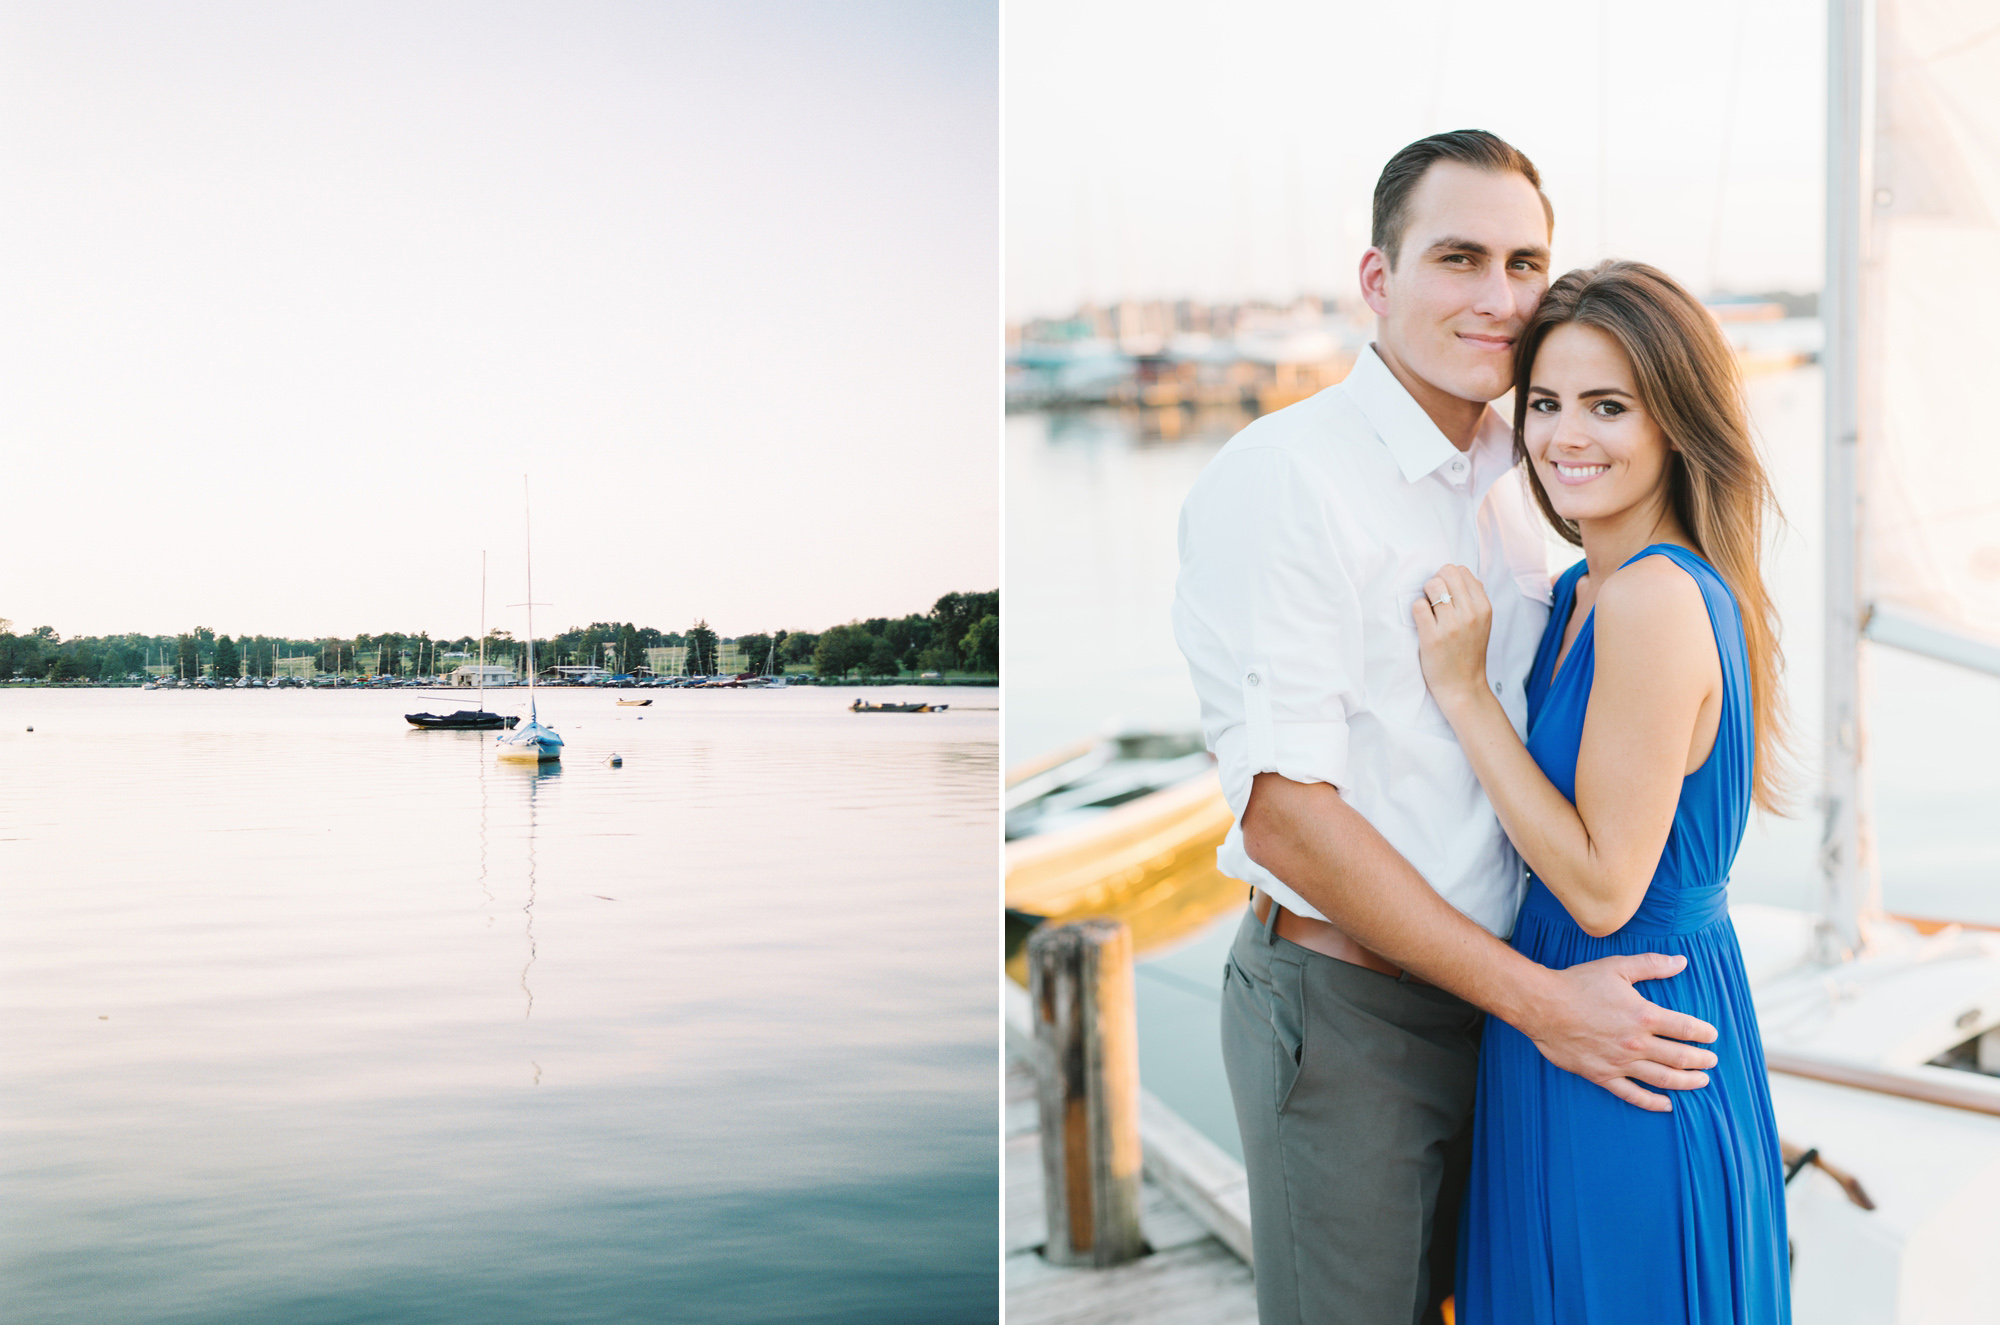 Nautical engagement session at White Rock Lake by Dallas wedding photographer Tenth & Grace.